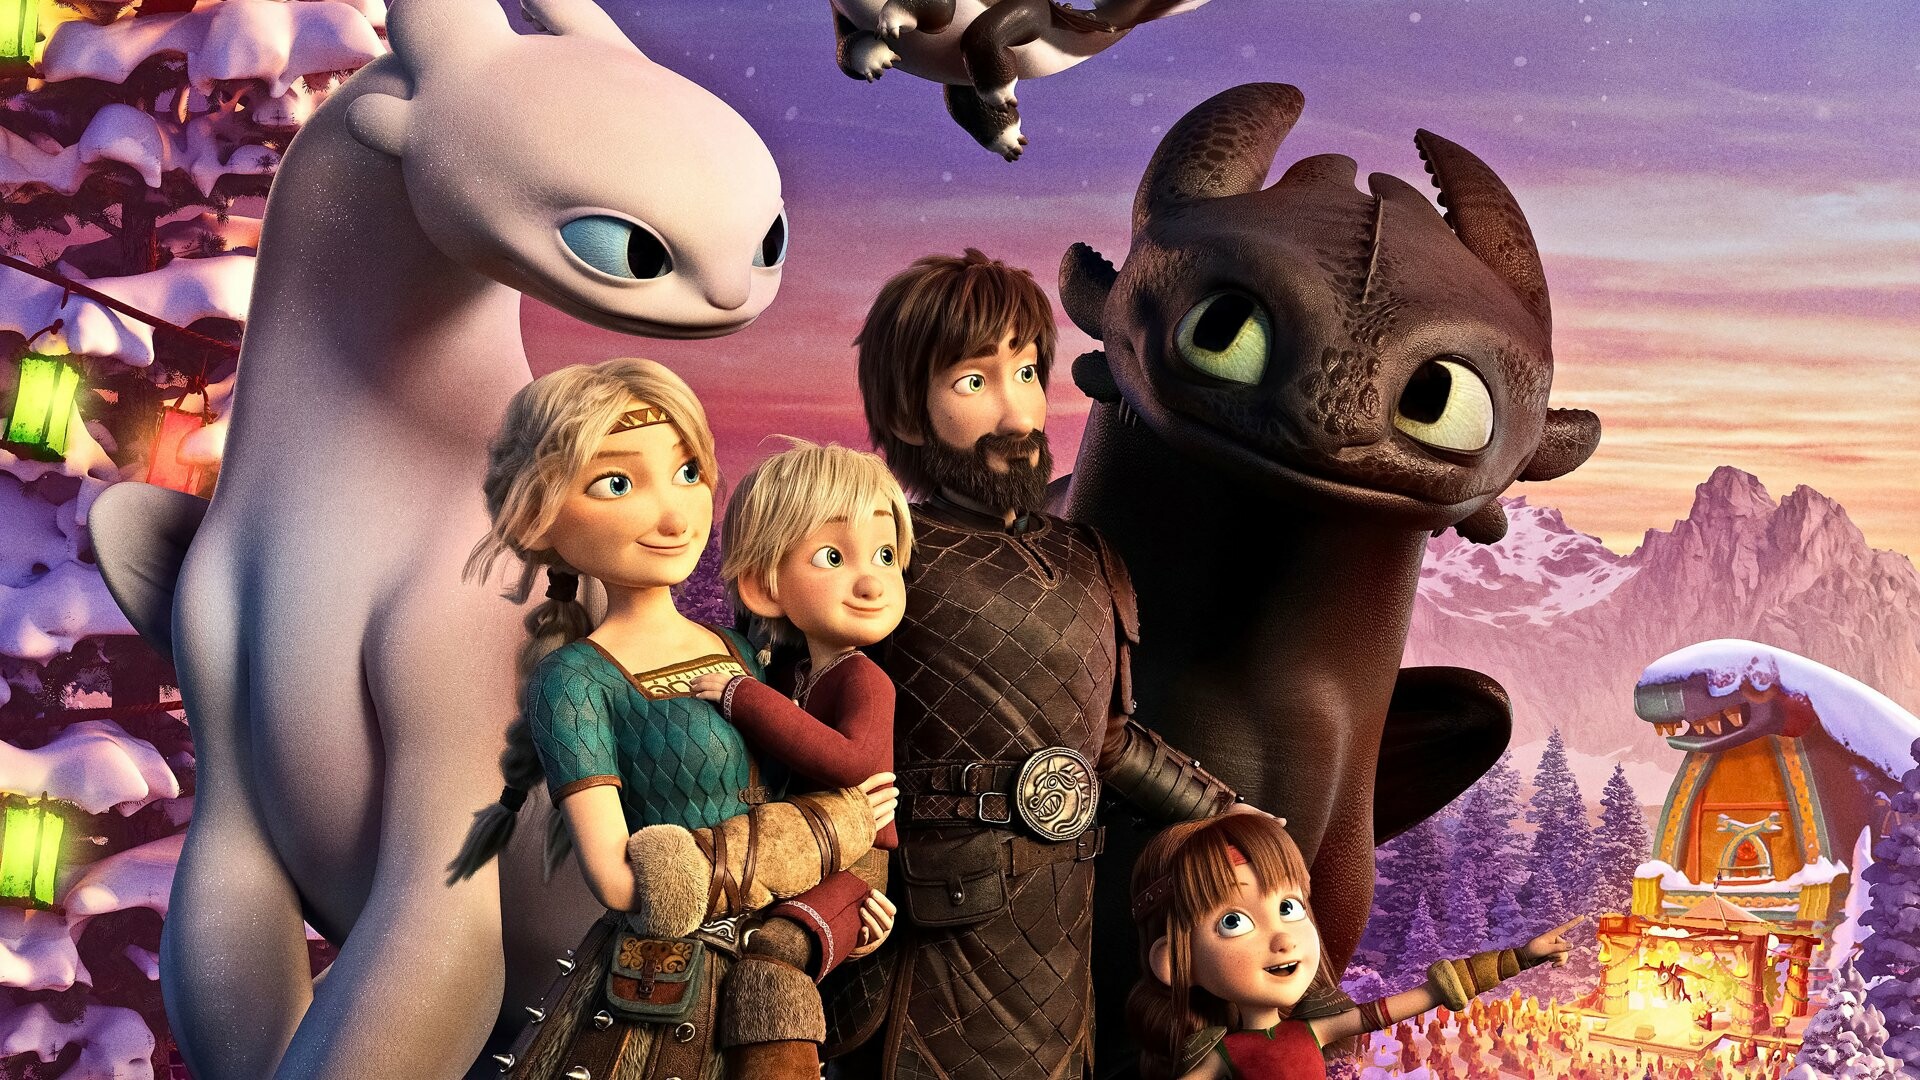 How to Train Your Dragon: Astrid Hofferson, Toothless, Hiccup Horrendous Haddock III. 1920x1080 Full HD Wallpaper.